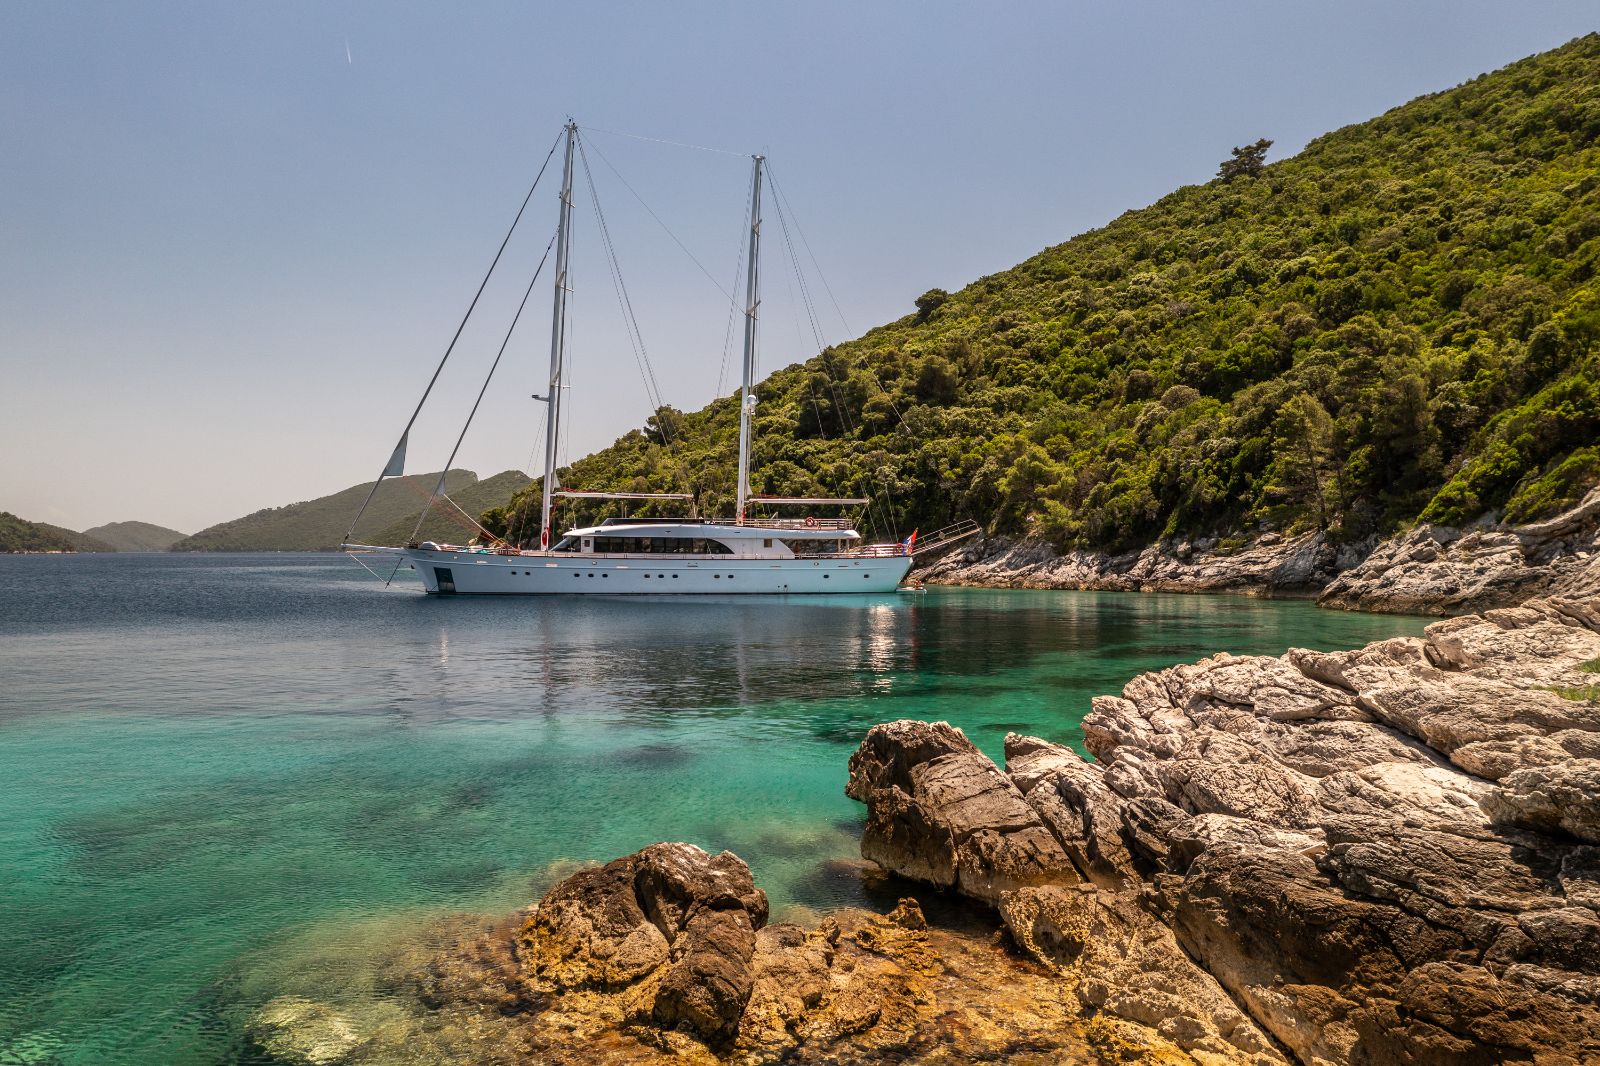 Exterior view of the Love Story gulet at bay in Croatia